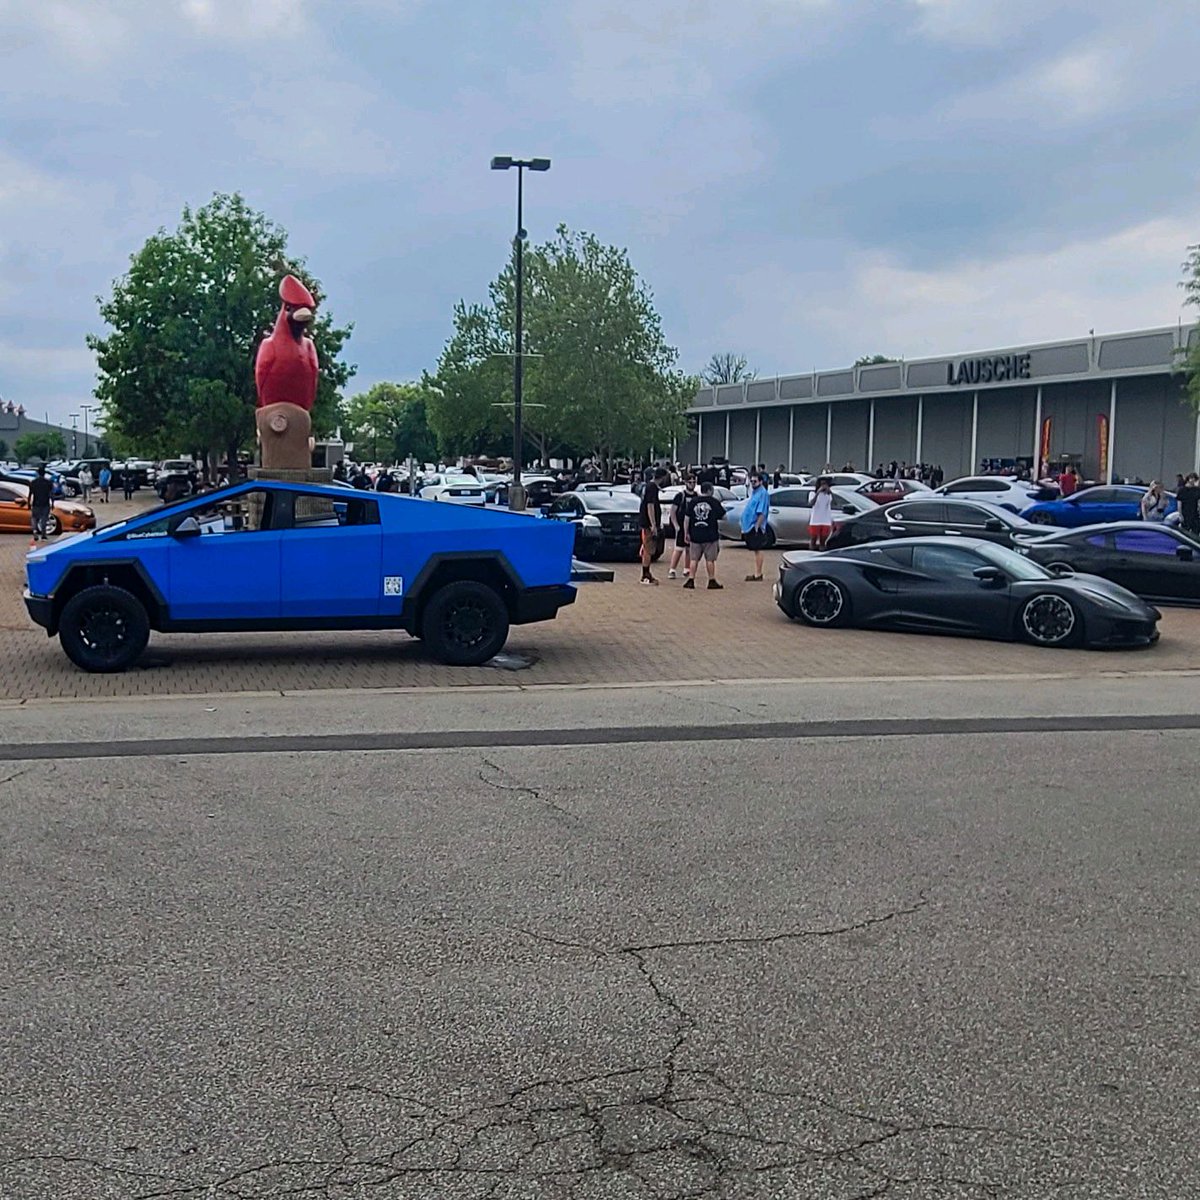 Check out the #bluecybertruck at the #slammedenuff show! 🚙 Even though we don't go all the way down, we're grateful for the acceptance. Featuring our buddy @cam.clutch. #customcars #carshow 🌟